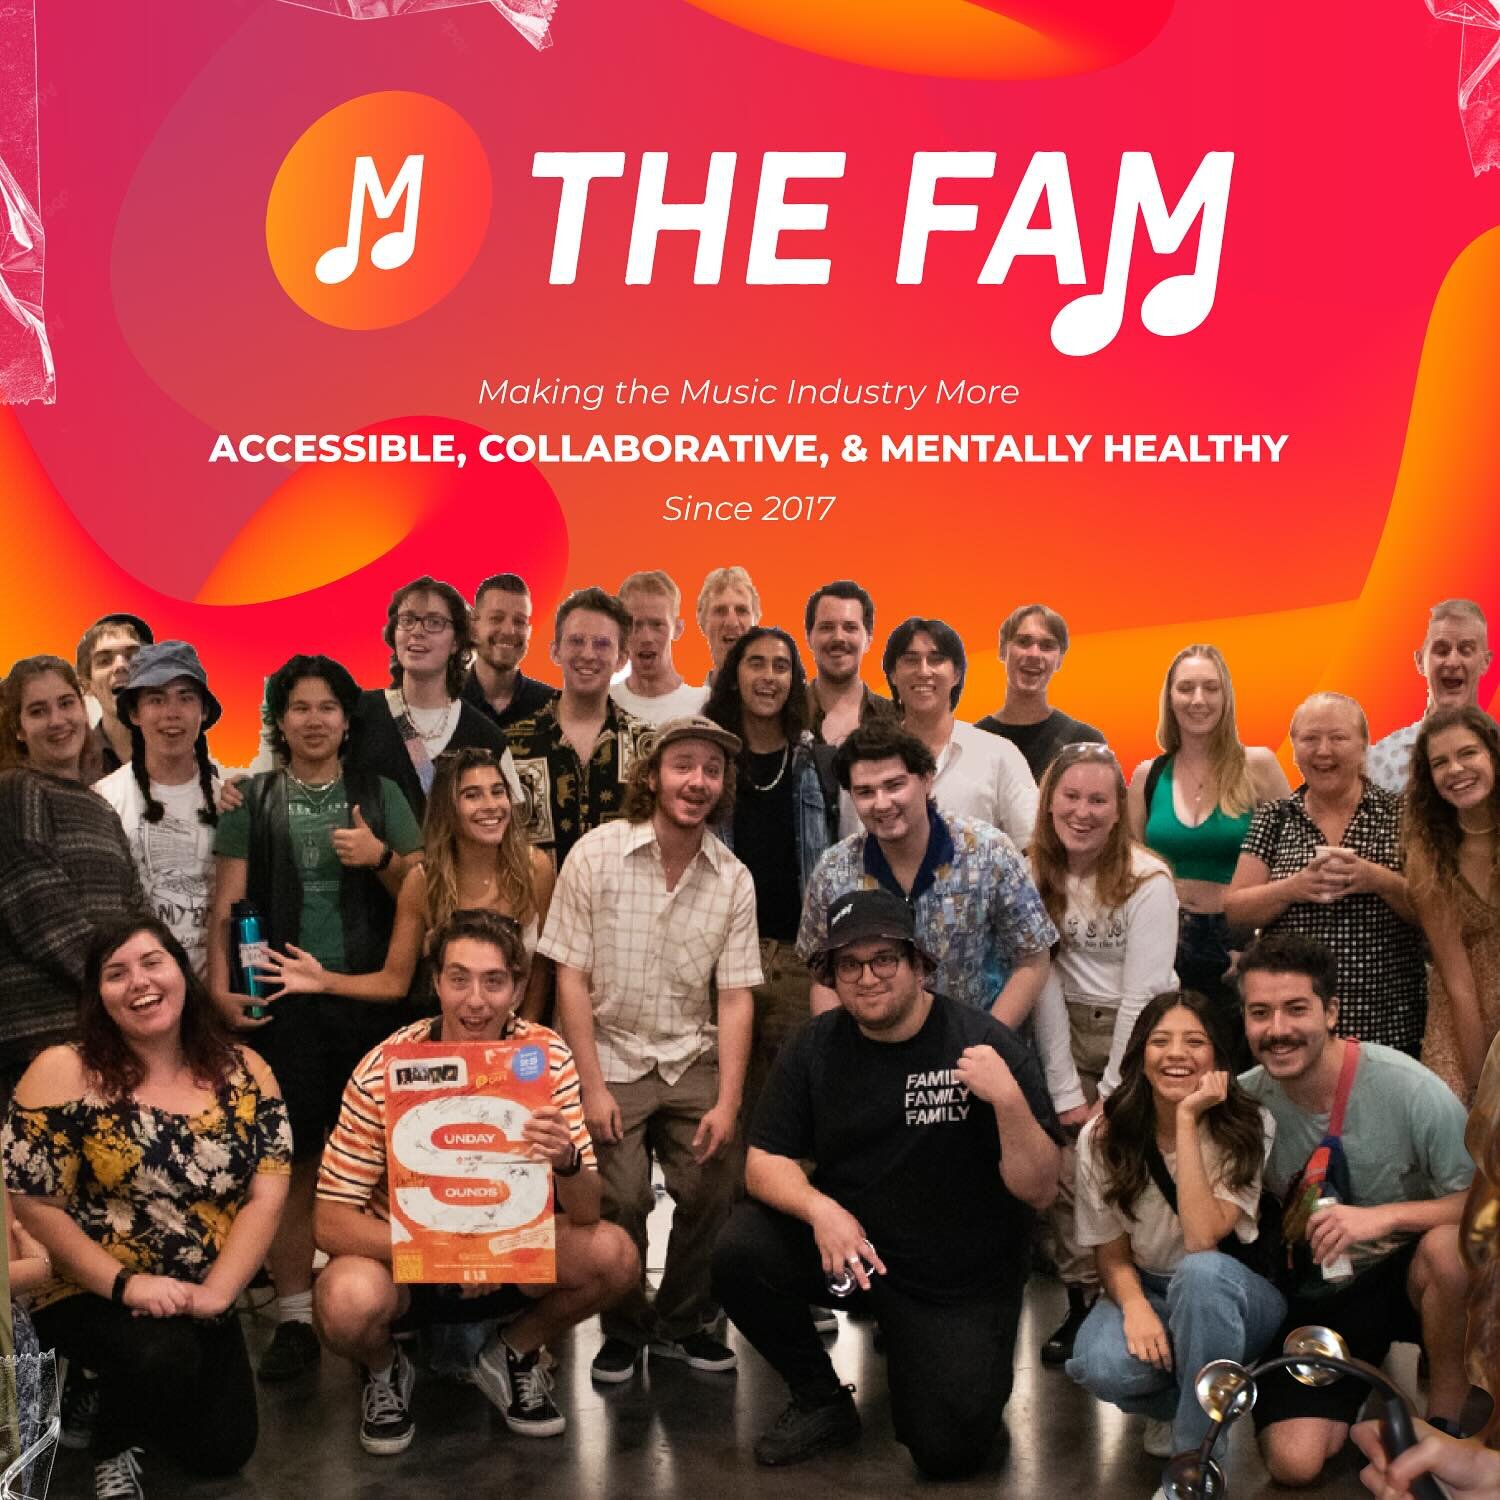 As a non-profit membership organization, the FAM is a movement that aims to break down the unhealthy and negative stereotypes and perpetuate the healthy stereotypes of the music industry. Our philosophy is that this approach will lead to a more acces